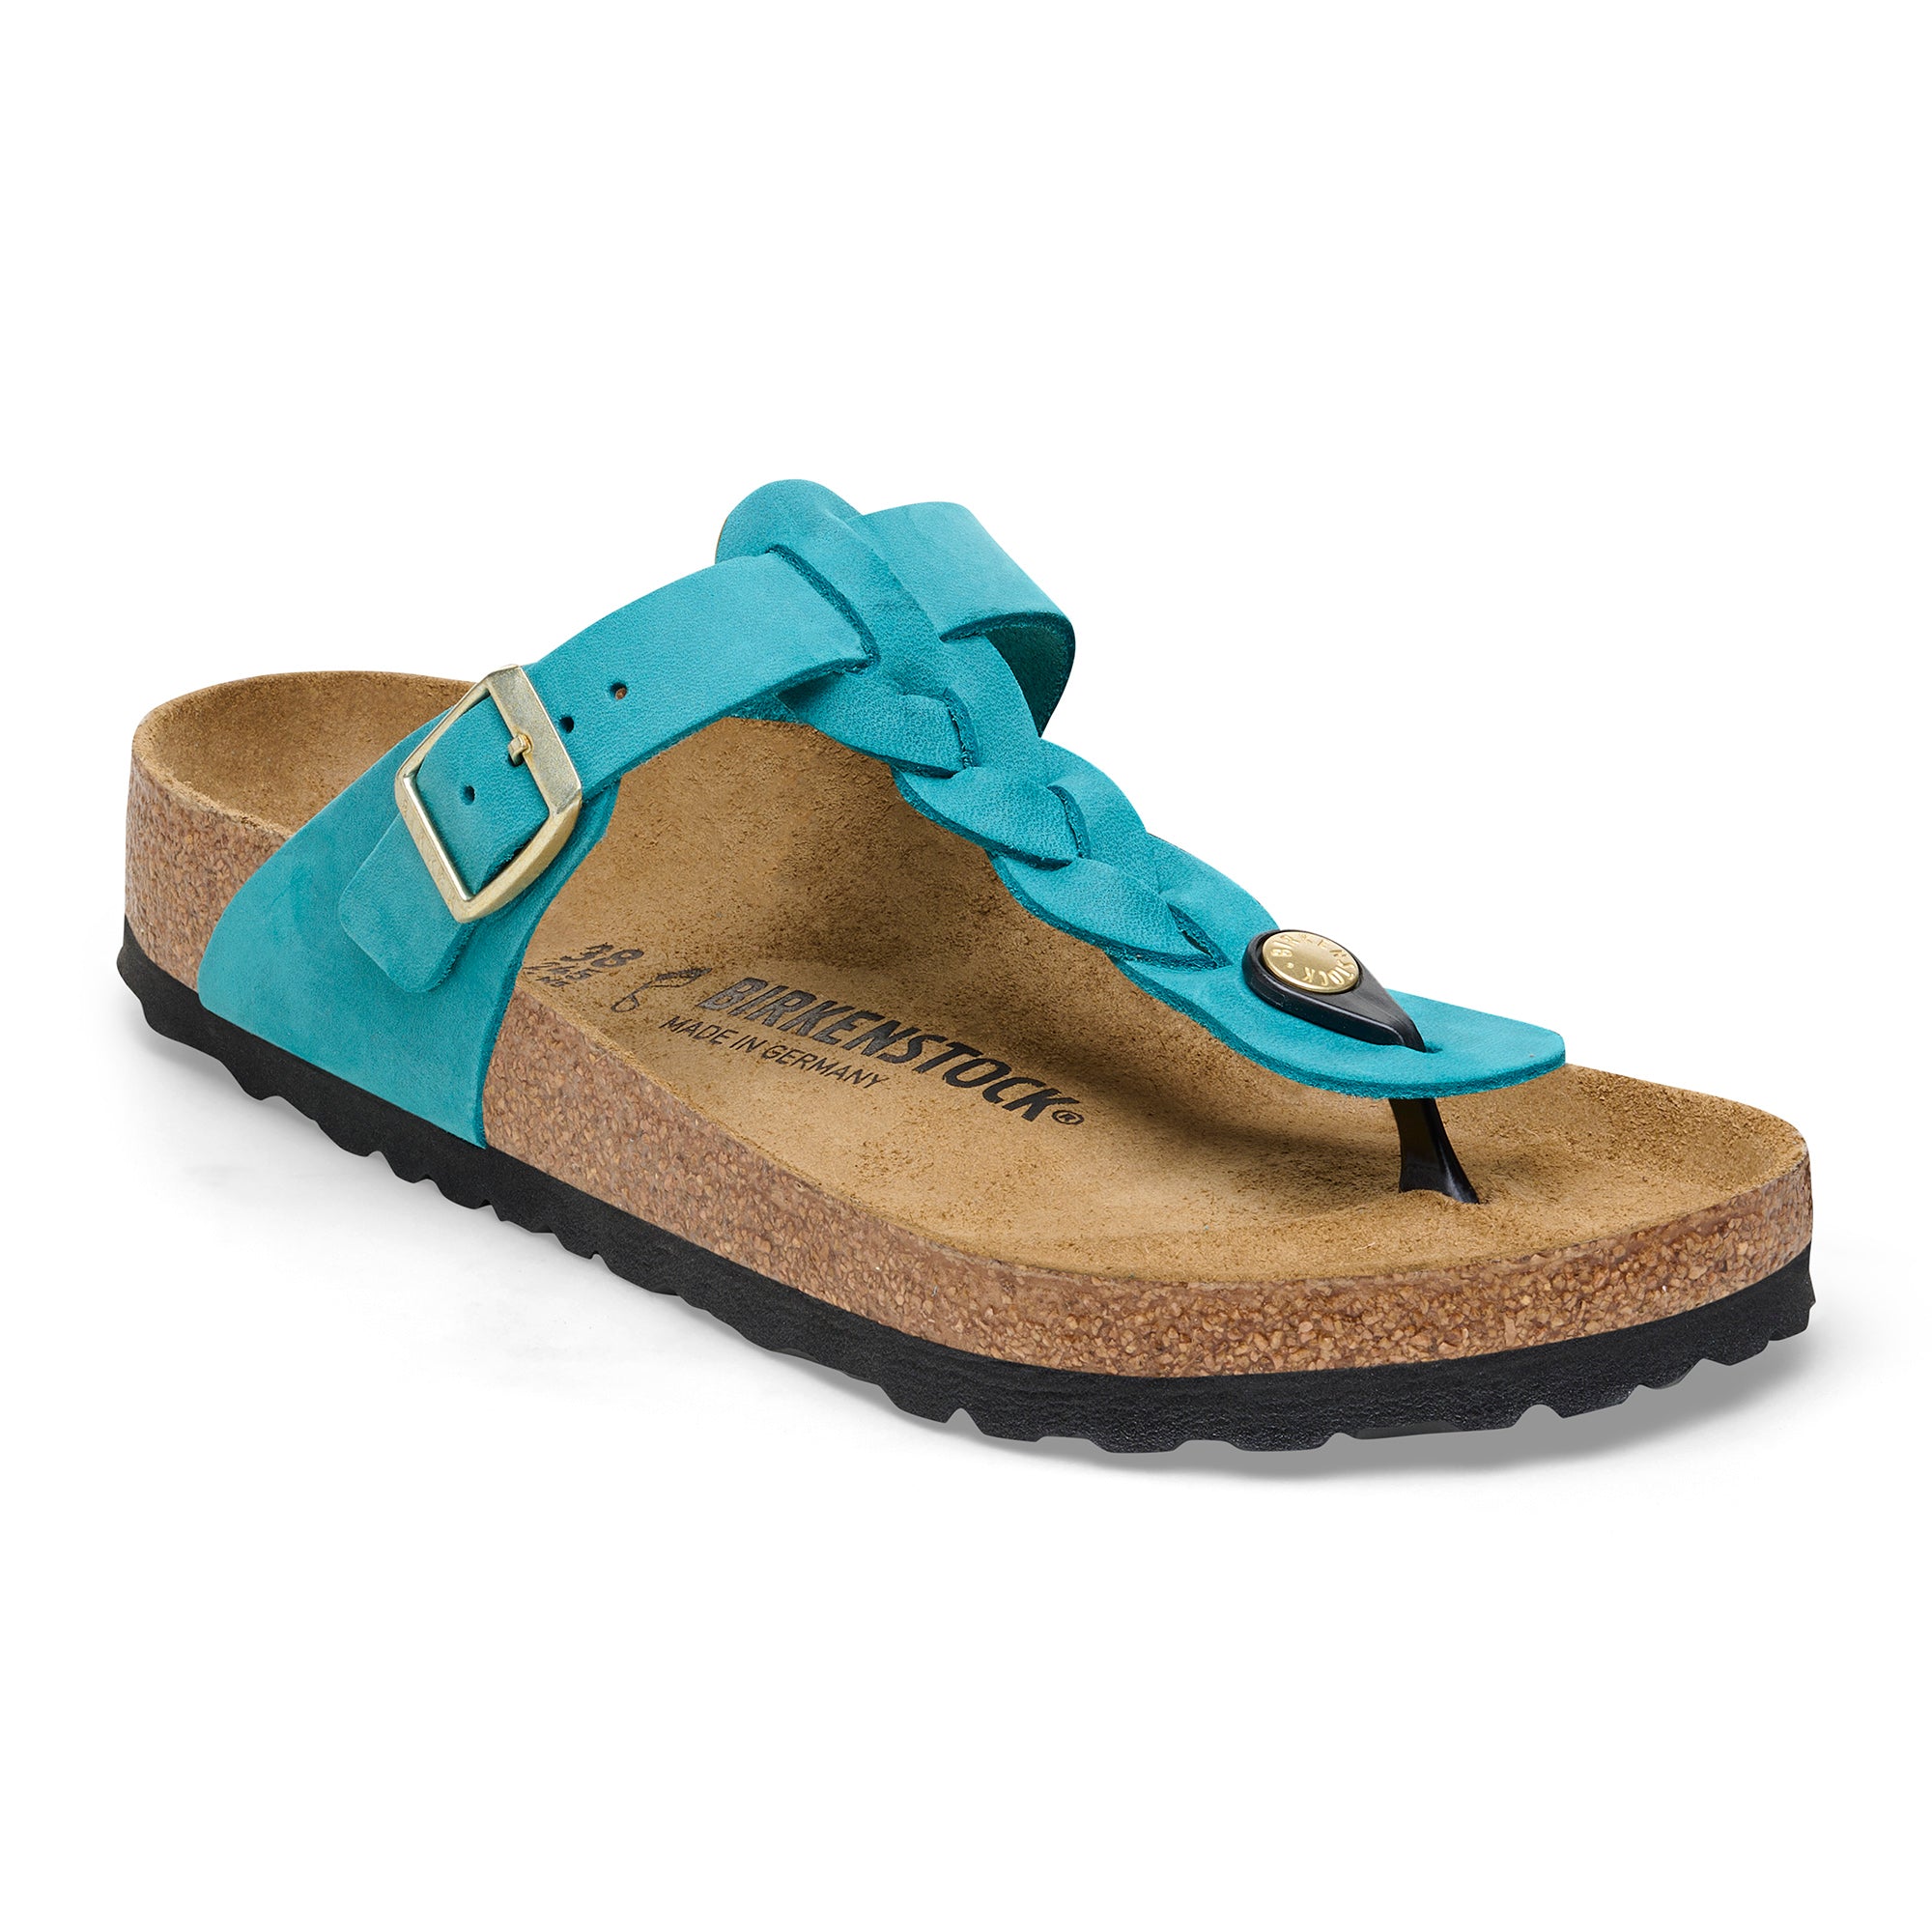 Birkenstock Limited Edition Gizeh Braid biscay bay oiled leather